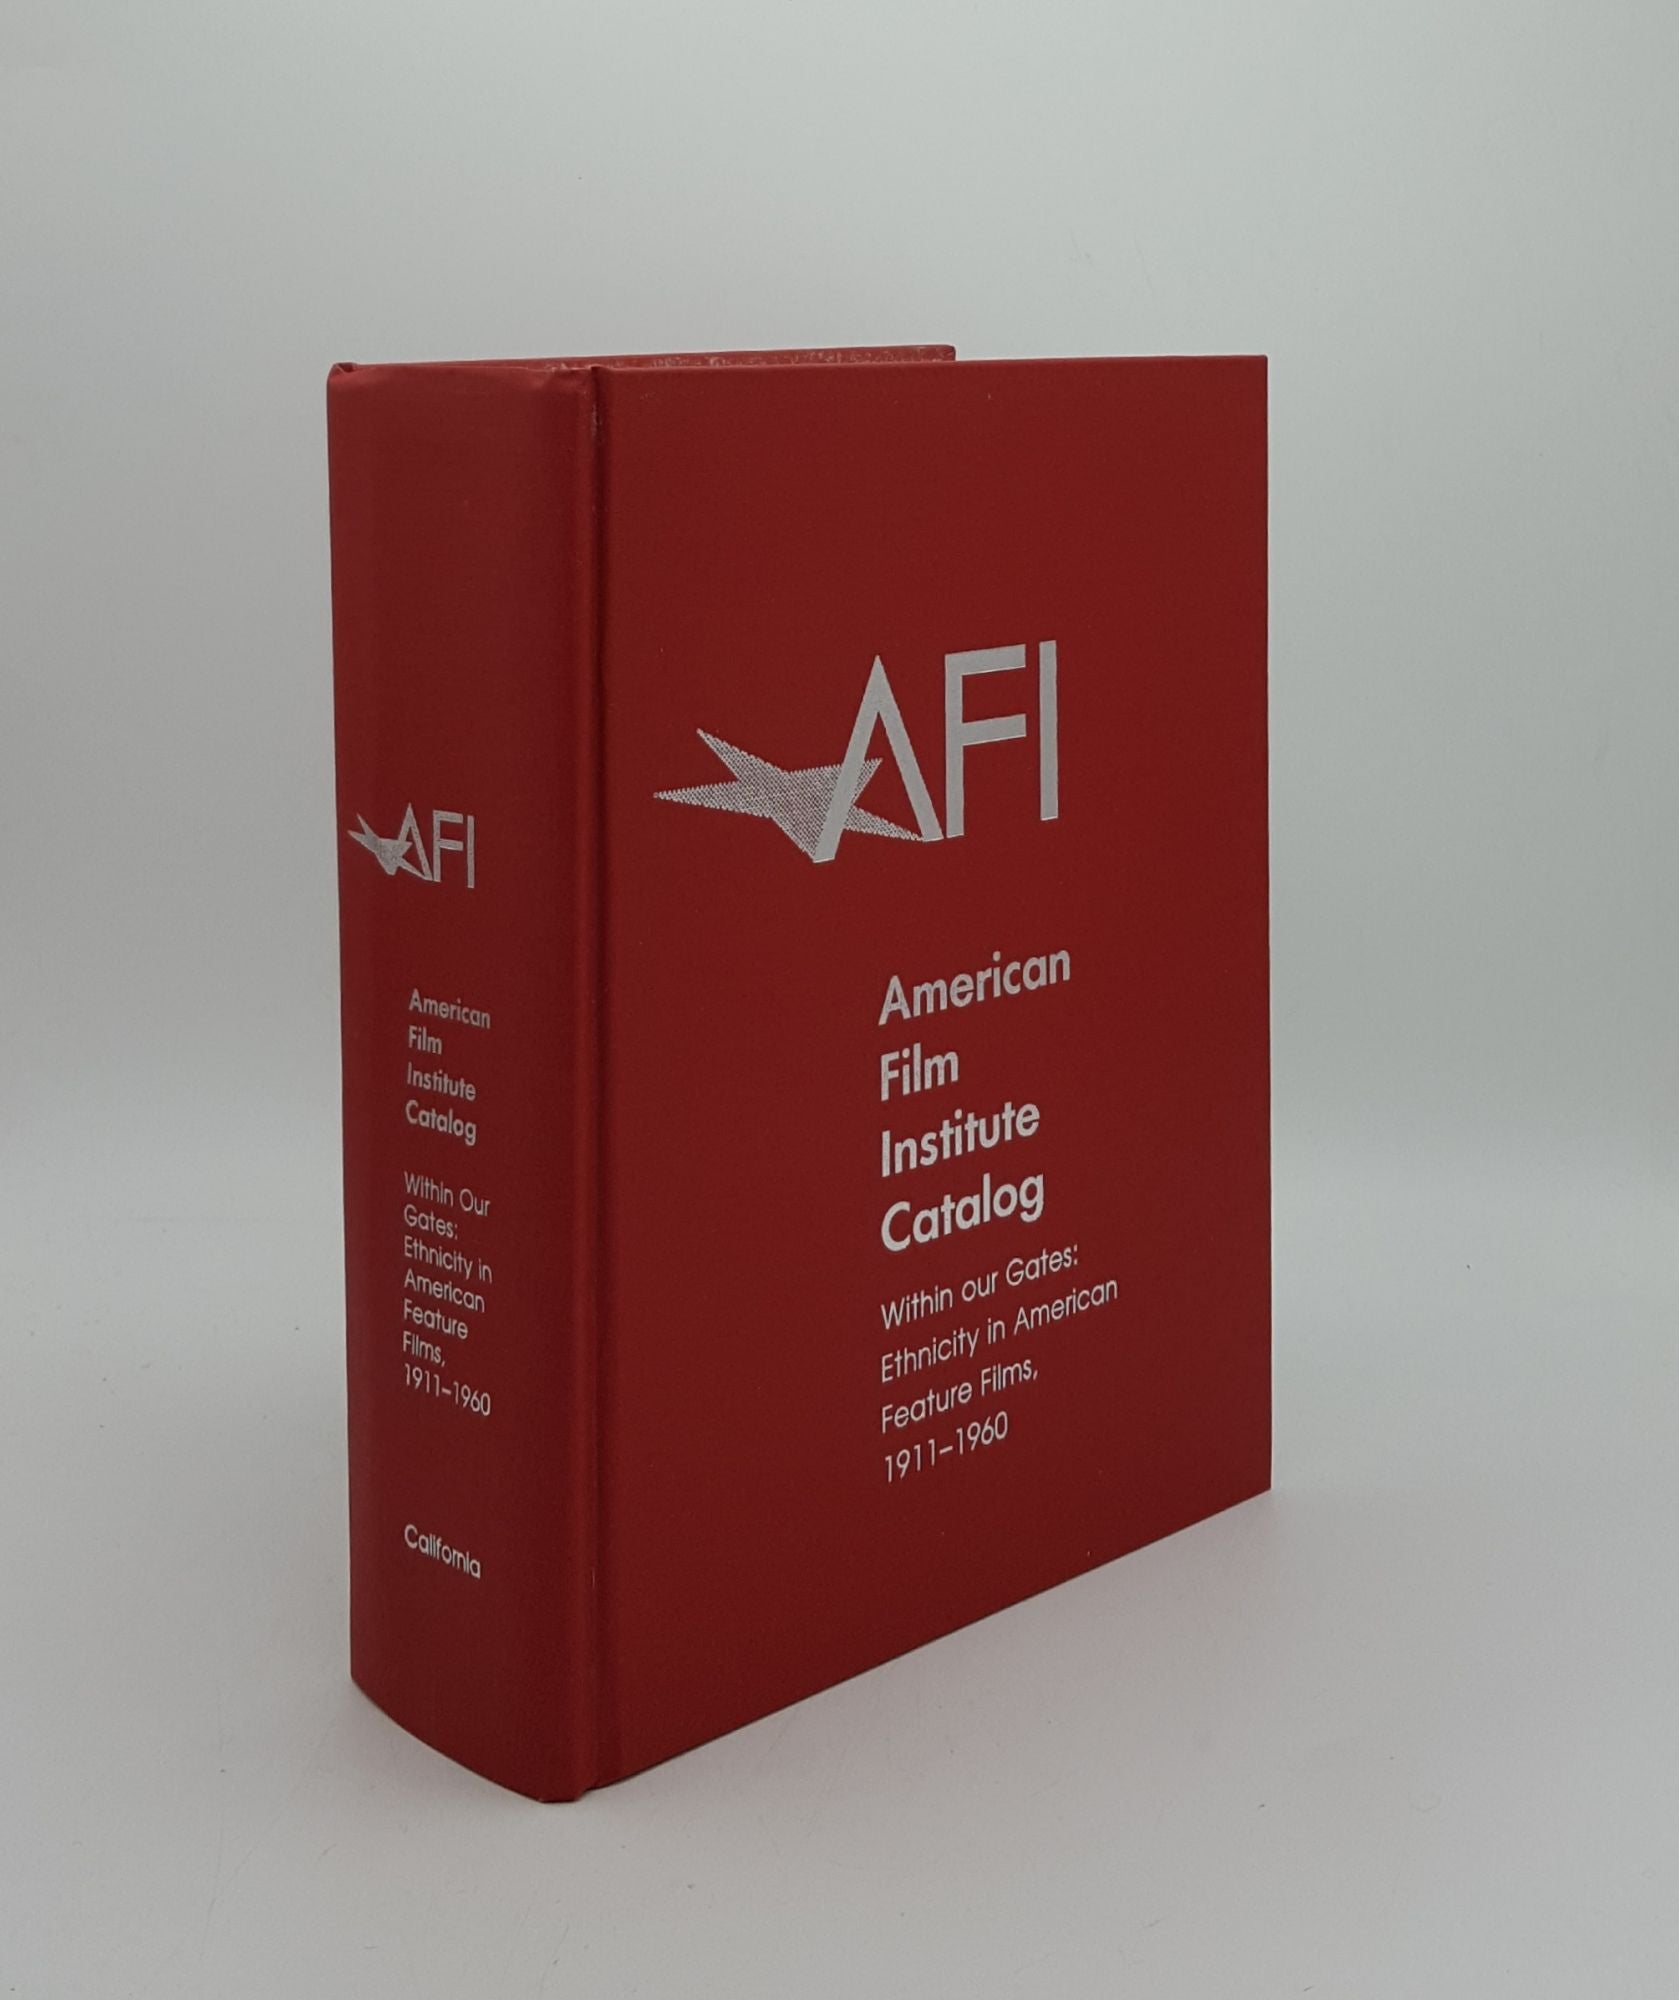 GEVINSON Alan - American Film Institute Catalog Within Our Gates Ethnicity in American Feature Films 1911-1960